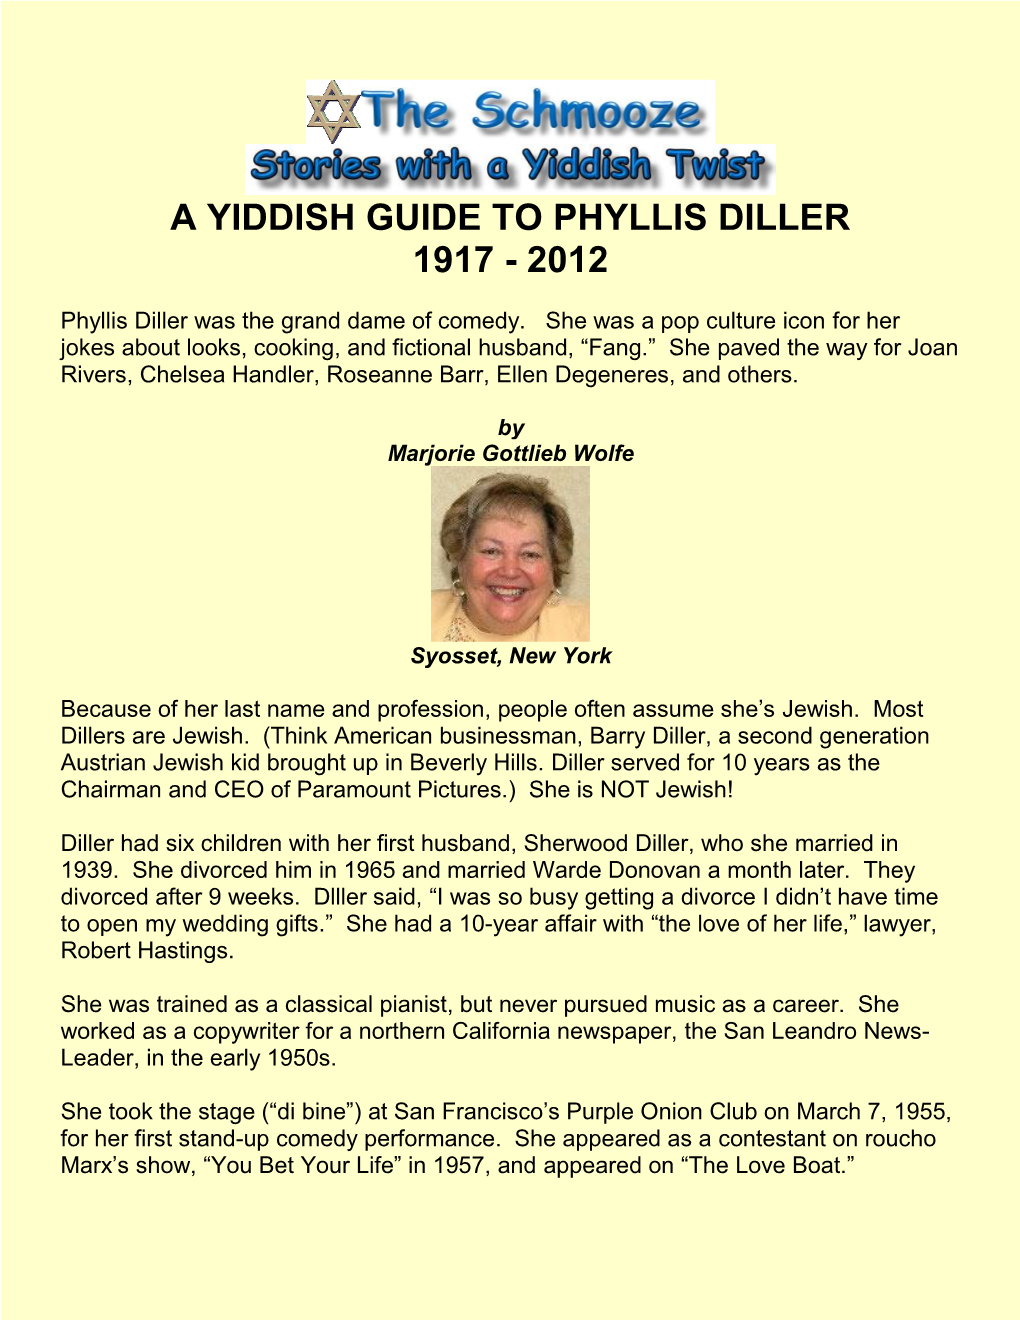 A Yiddish Guide to Phyllis Diller 1917 - 2012